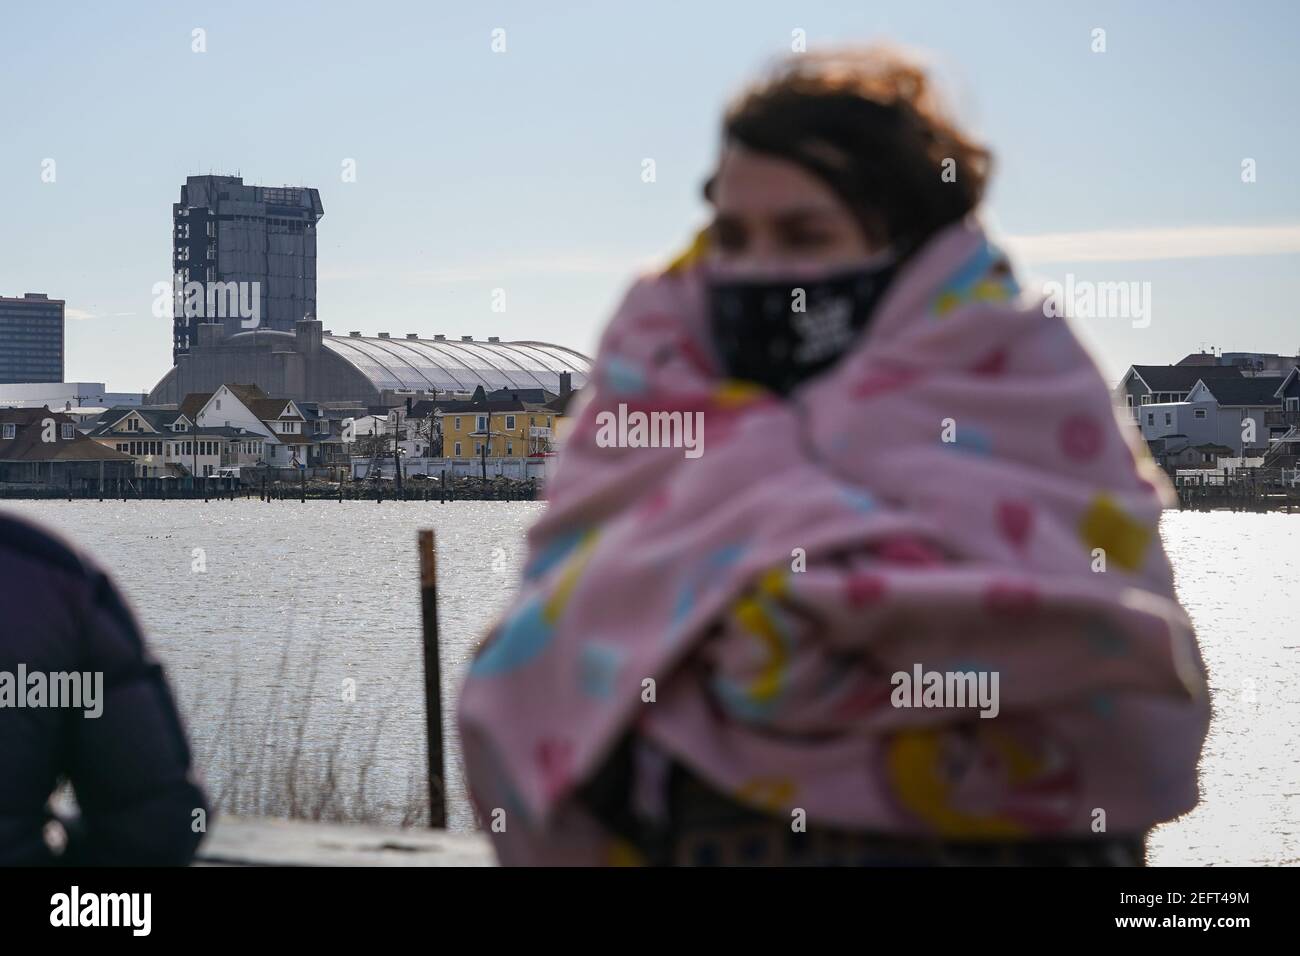 Atlantic City, USA. 17th Feb, 2021. A spectator wrapped in a Disney princess blanket waits for the demolition of the former Trump Plaza Hotel and Casino in Atlantic City, USA. The hotel and casino owned by former President Donald Trump was shut down in 2014 after going bankrupt multiple times. Credit: Chase Sutton/Alamy Live News Stock Photo